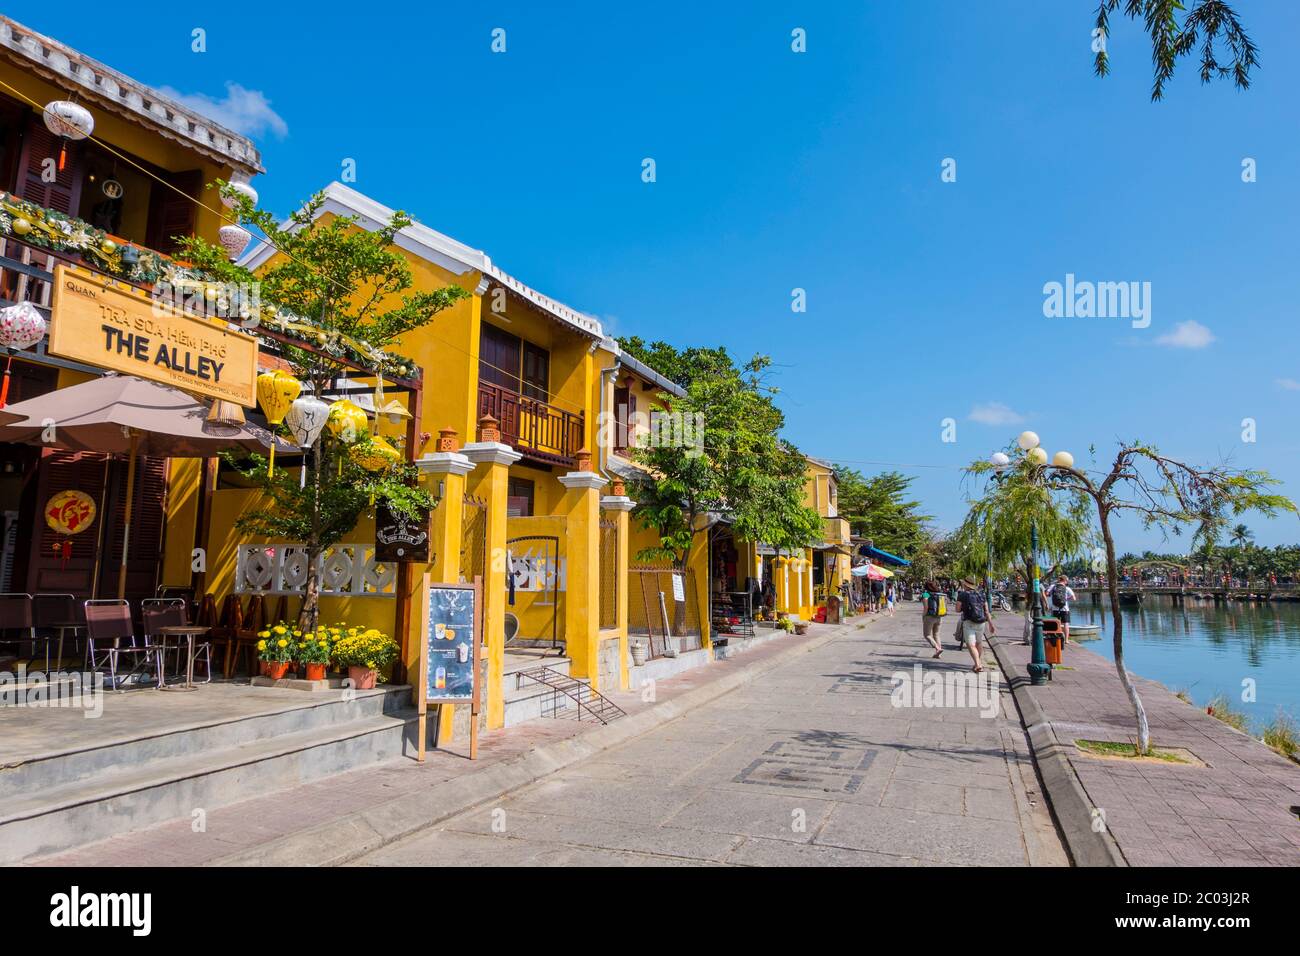 Cong Nu Ngoc Hoa, riverside street leading to old town, Hoi An, Vietnam, Asia Stock Photo